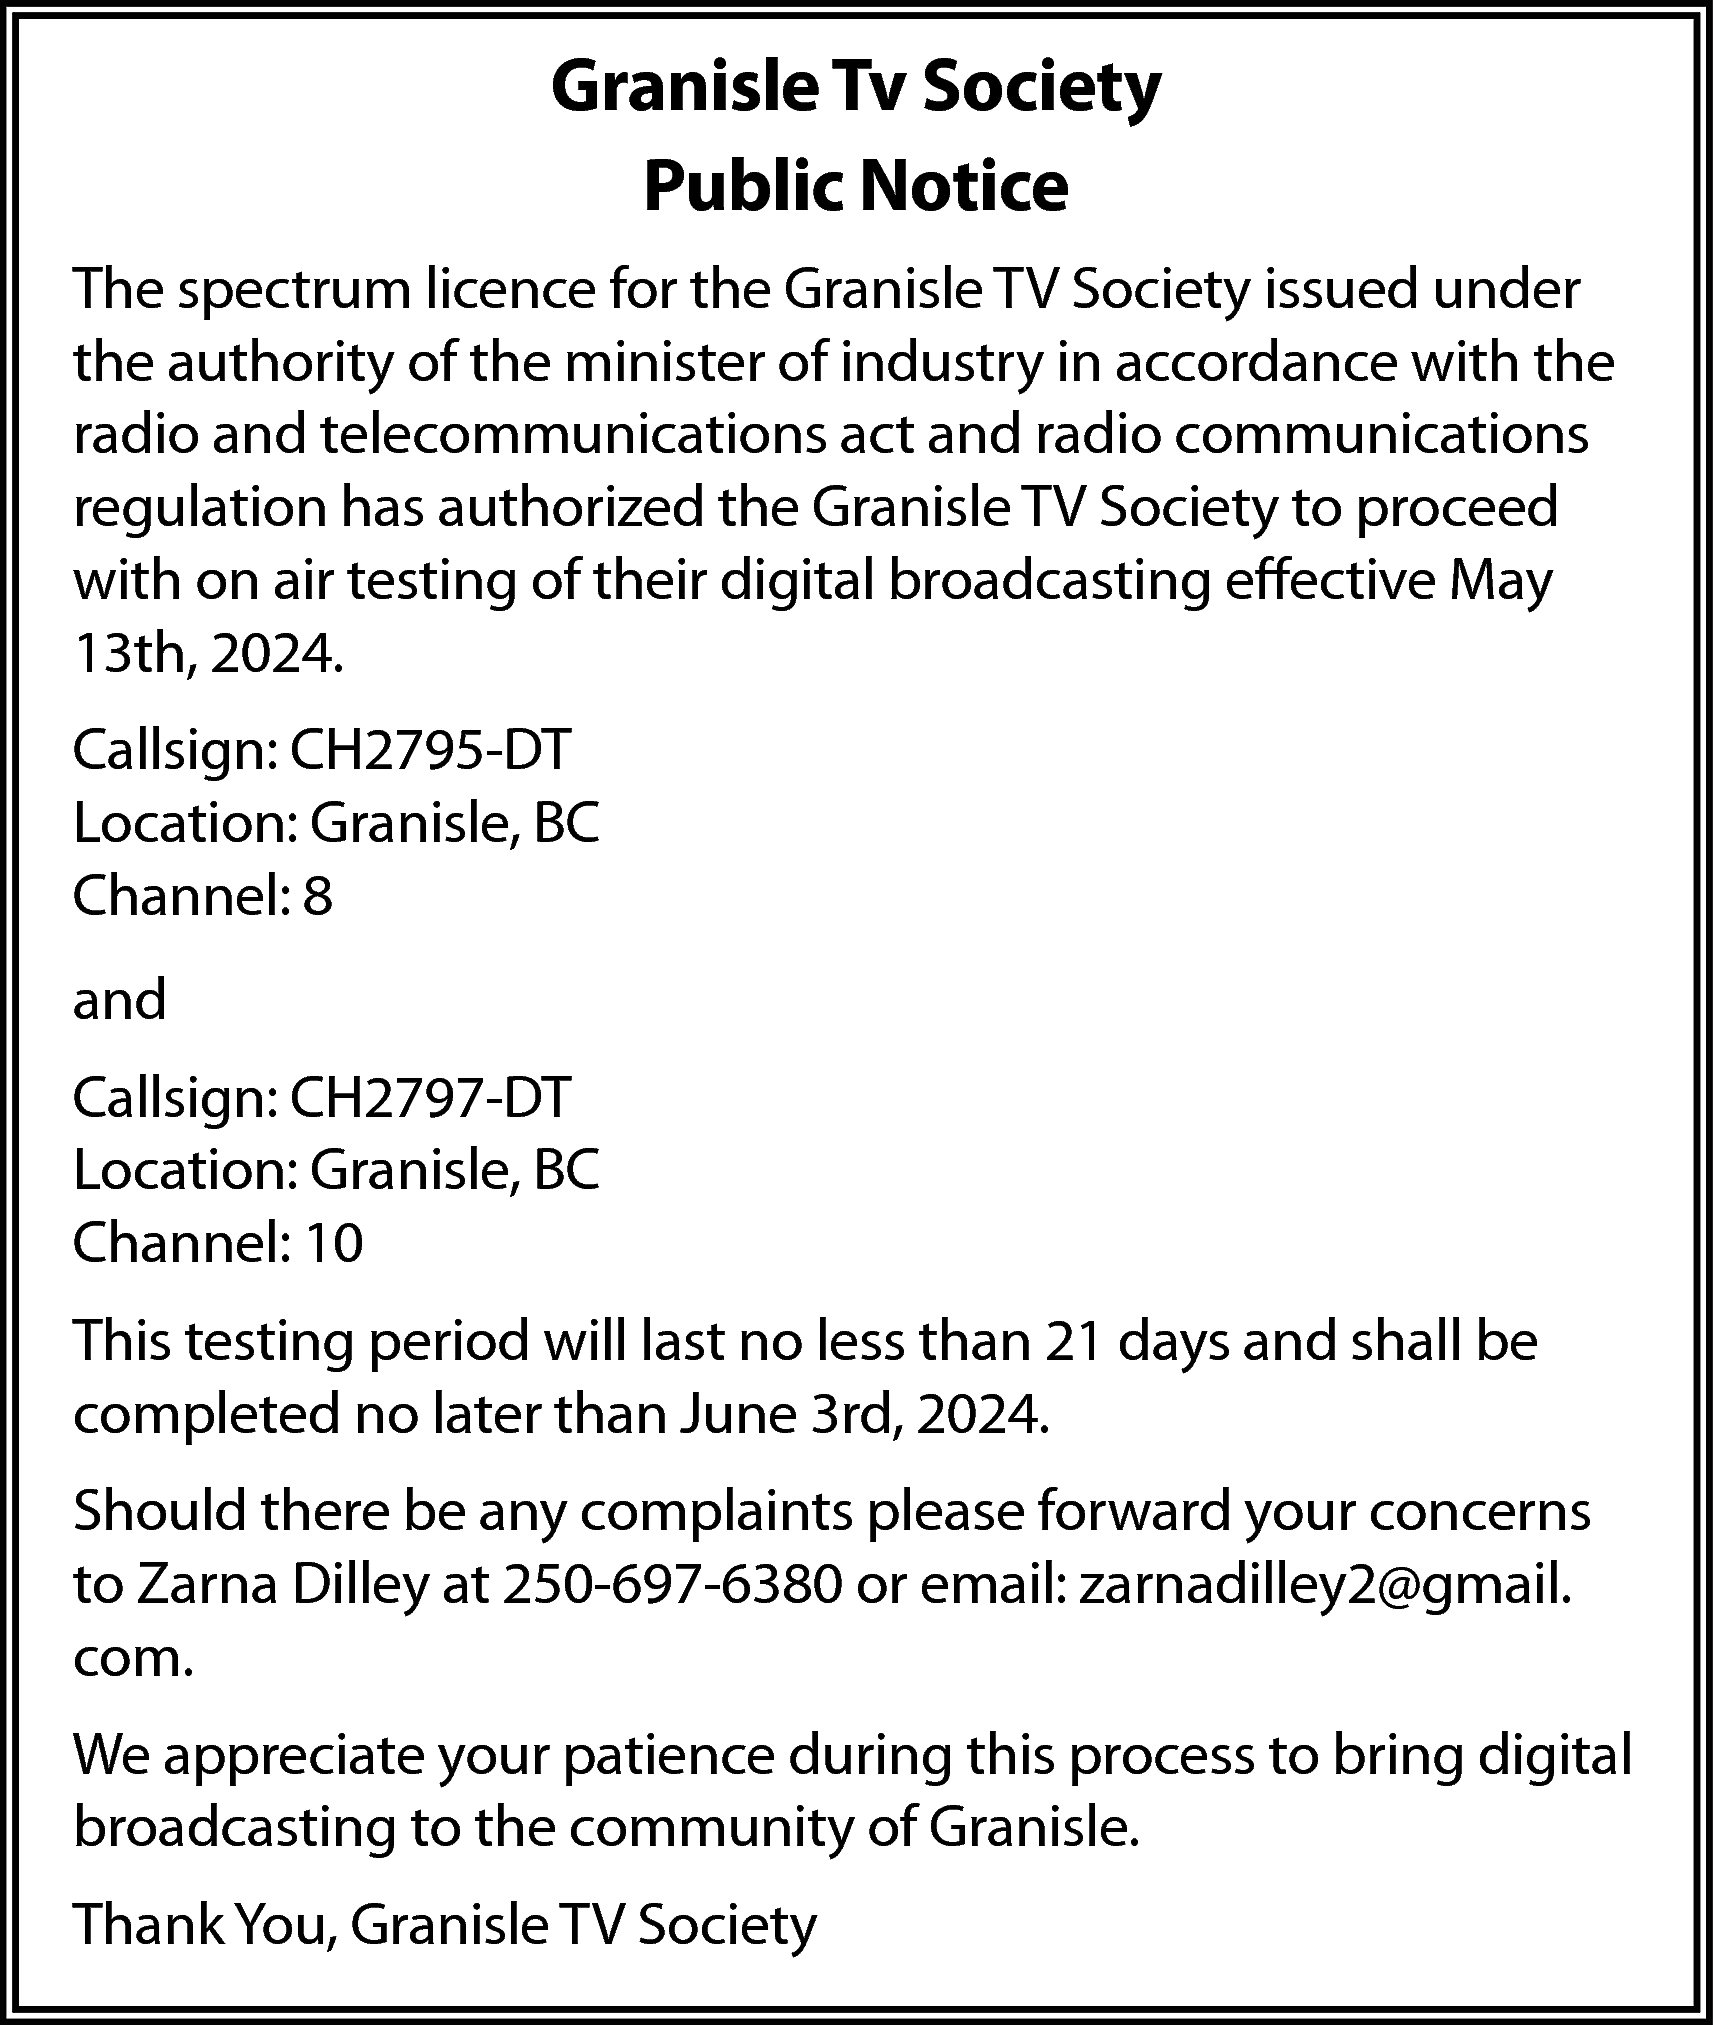 Granisle Tv Society <br>Public Notice  Granisle Tv Society  Public Notice  The spectrum licence for the Granisle TV Society issued under  the authority of the minister of industry in accordance with the  radio and telecommunications act and radio communications  regulation has authorized the Granisle TV Society to proceed  with on air testing of their digital broadcasting effective May  13th, 2024.  Callsign: CH2795-DT  Location: Granisle, BC  Channel: 8  and  Callsign: CH2797-DT  Location: Granisle, BC  Channel: 10  This testing period will last no less than 21 days and shall be  completed no later than June 3rd, 2024.  Should there be any complaints please forward your concerns  to Zarna Dilley at 250-697-6380 or email: zarnadilley2@gmail.  com.  We appreciate your patience during this process to bring digital  broadcasting to the community of Granisle.  Thank You, Granisle TV Society    